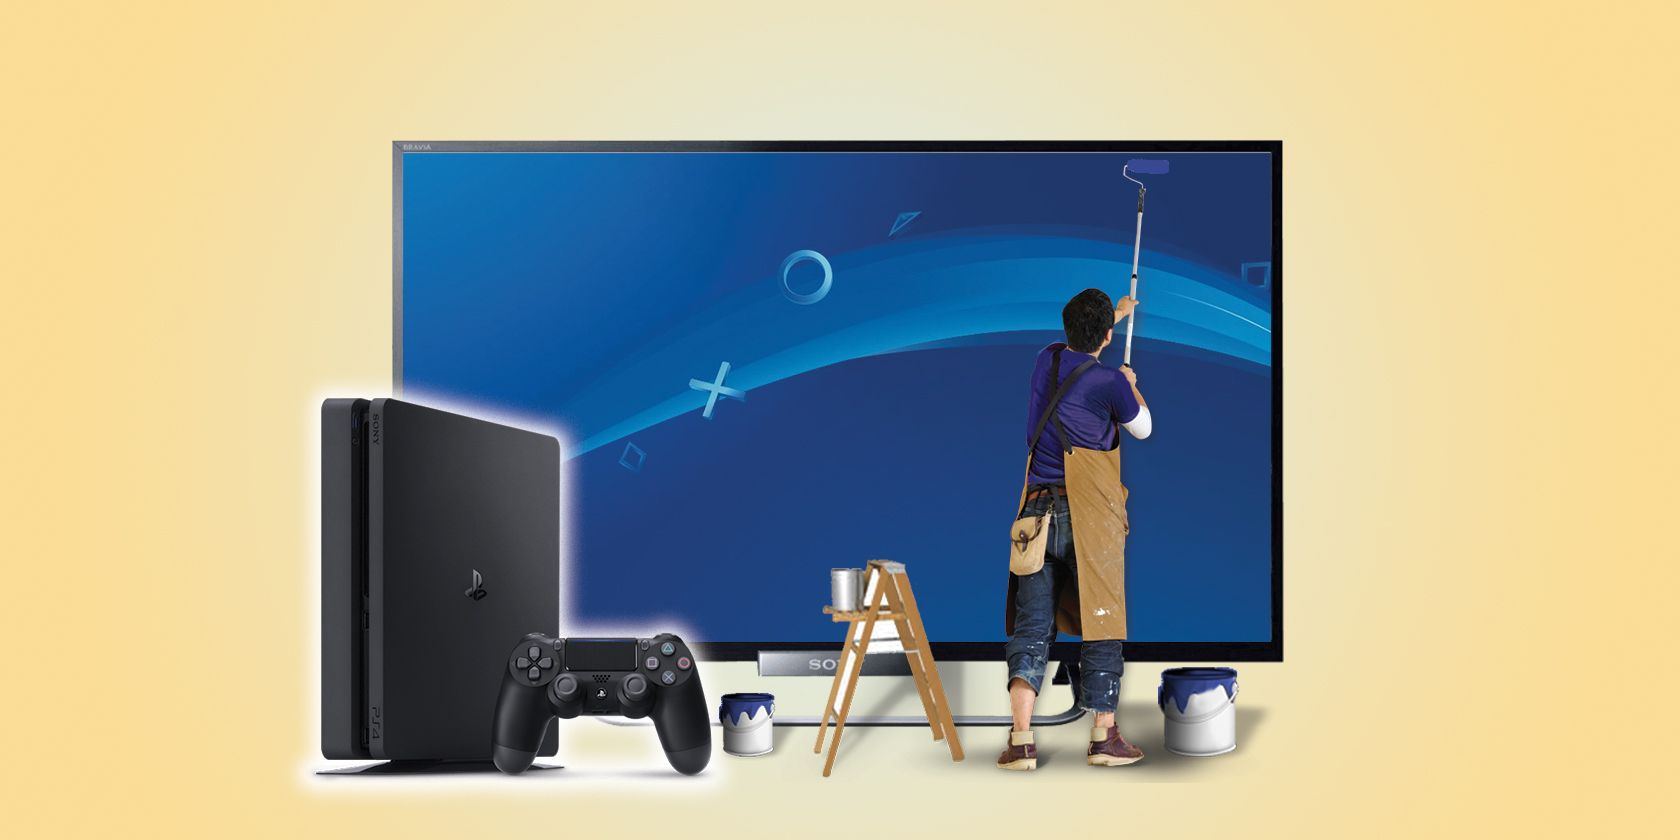 How to Change Your PS4 Wallpaper